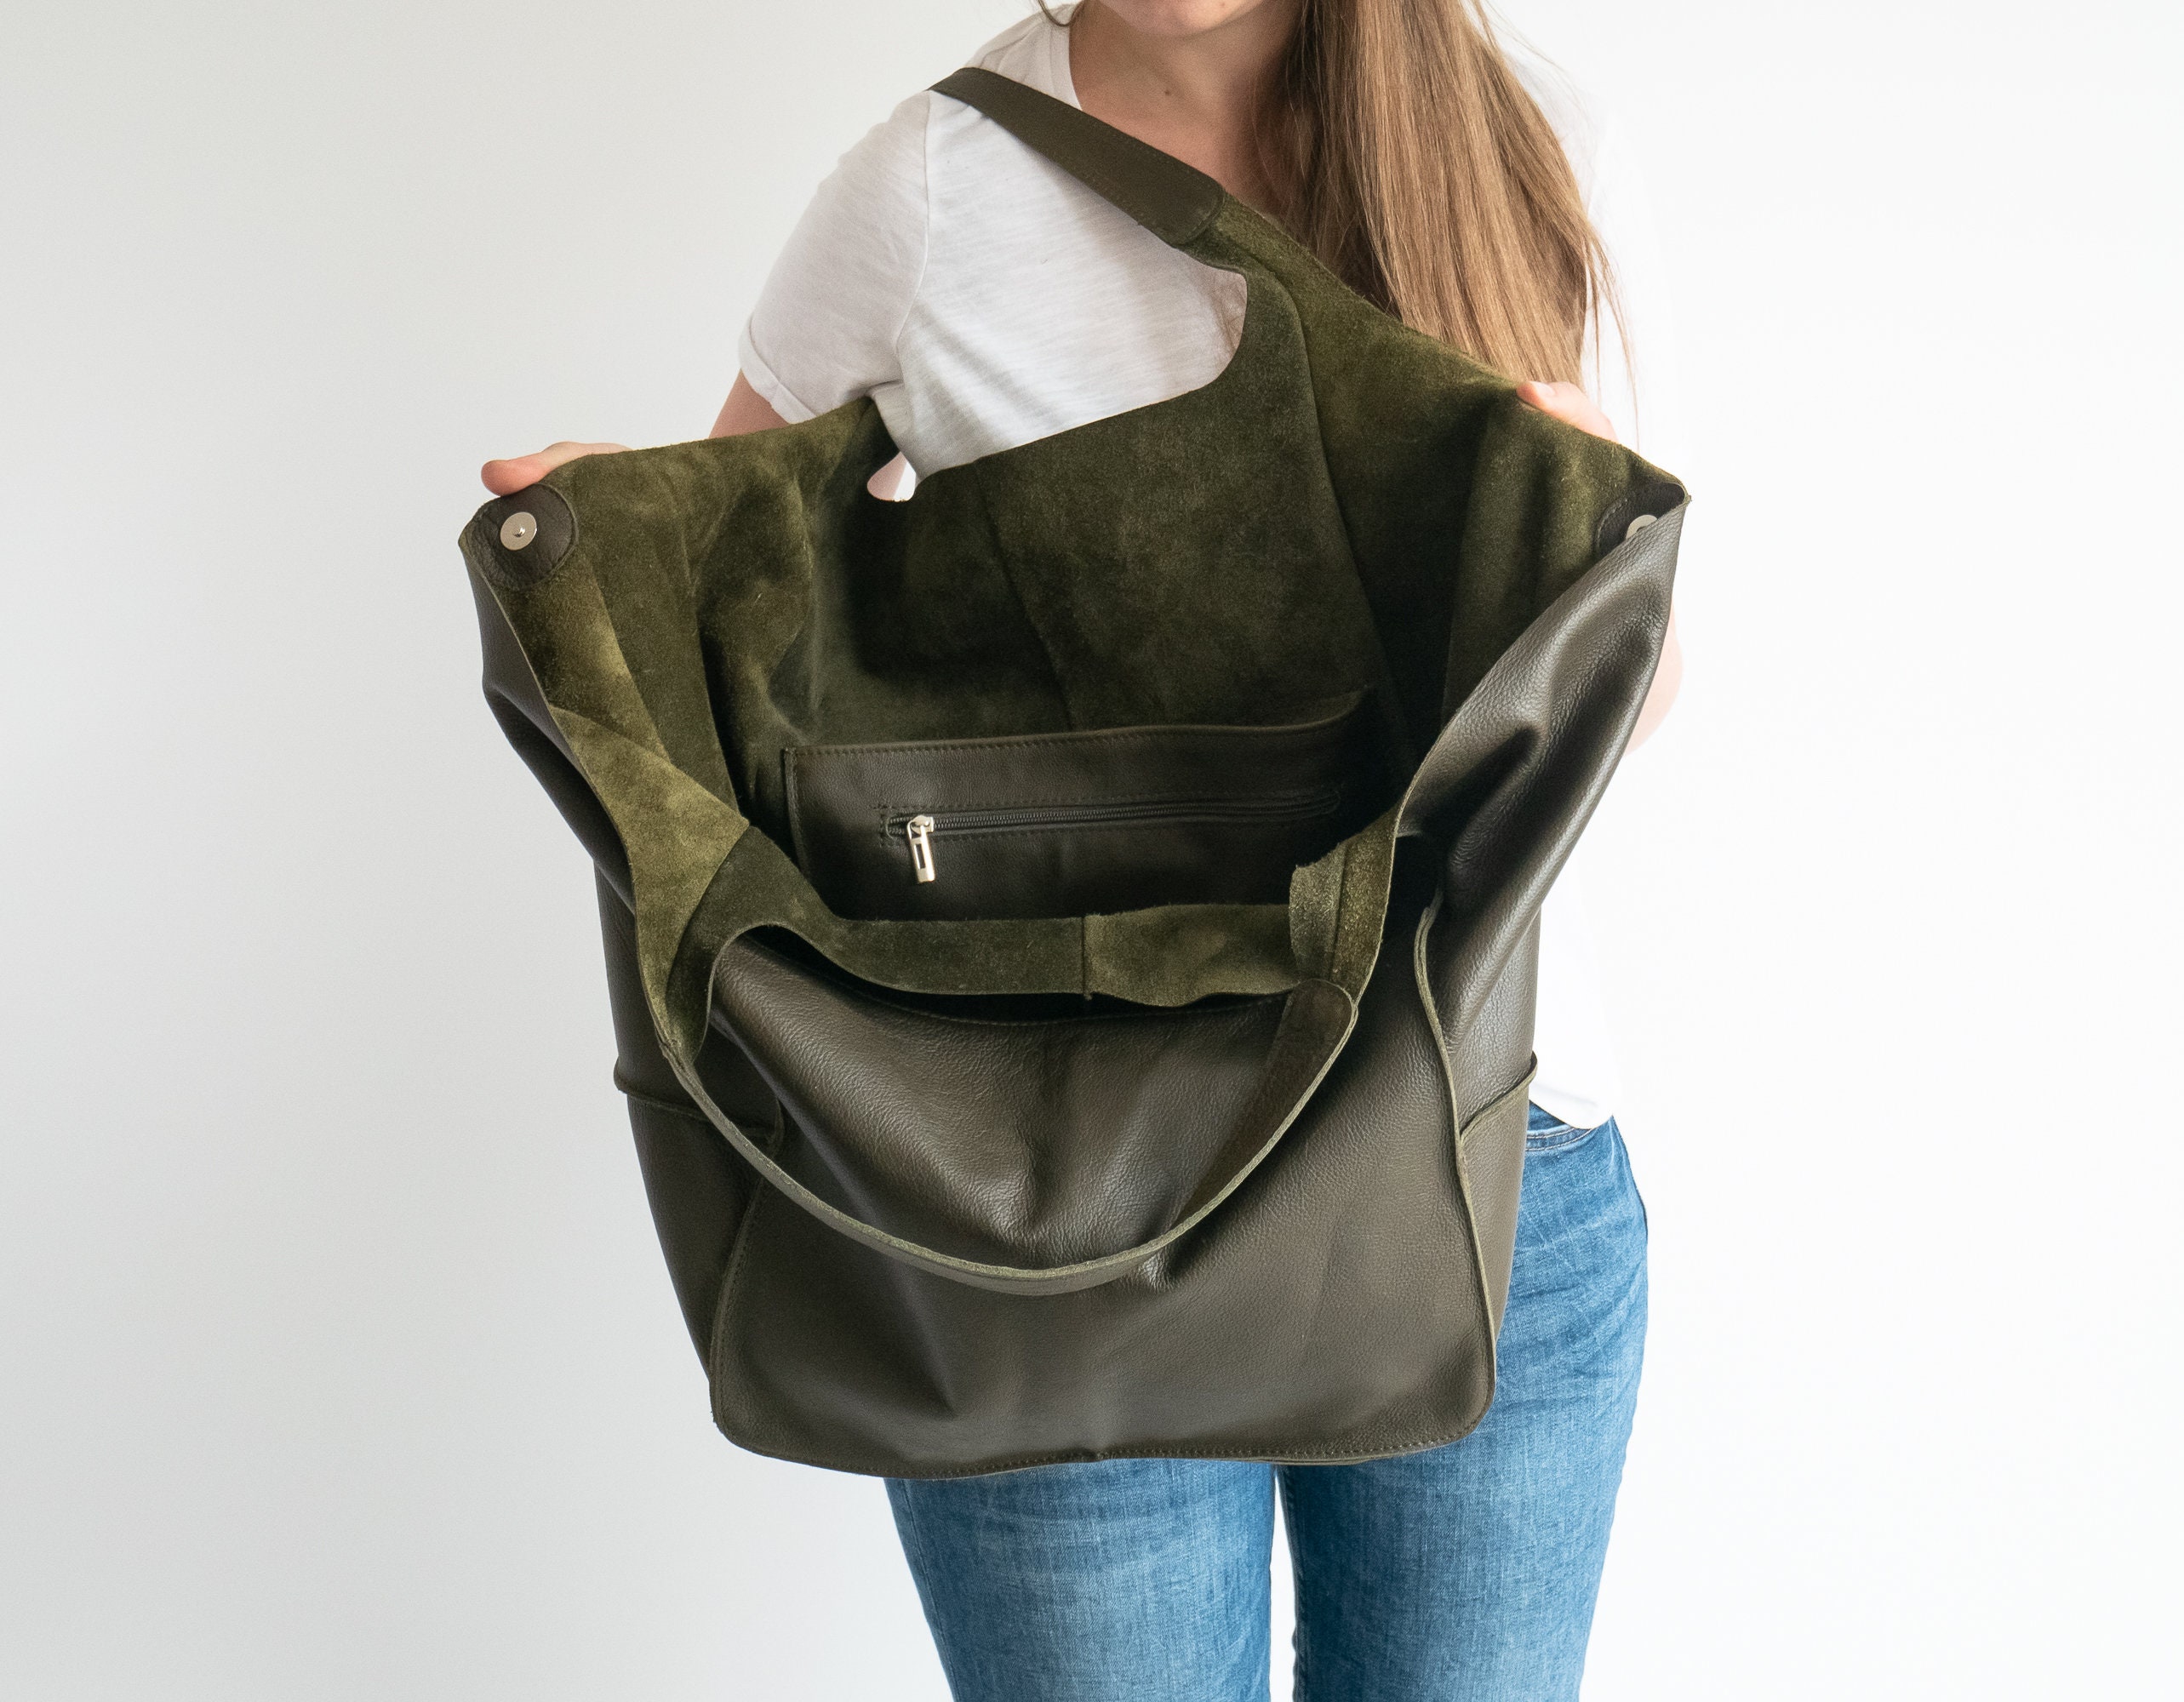 The Foldover Transport Tote